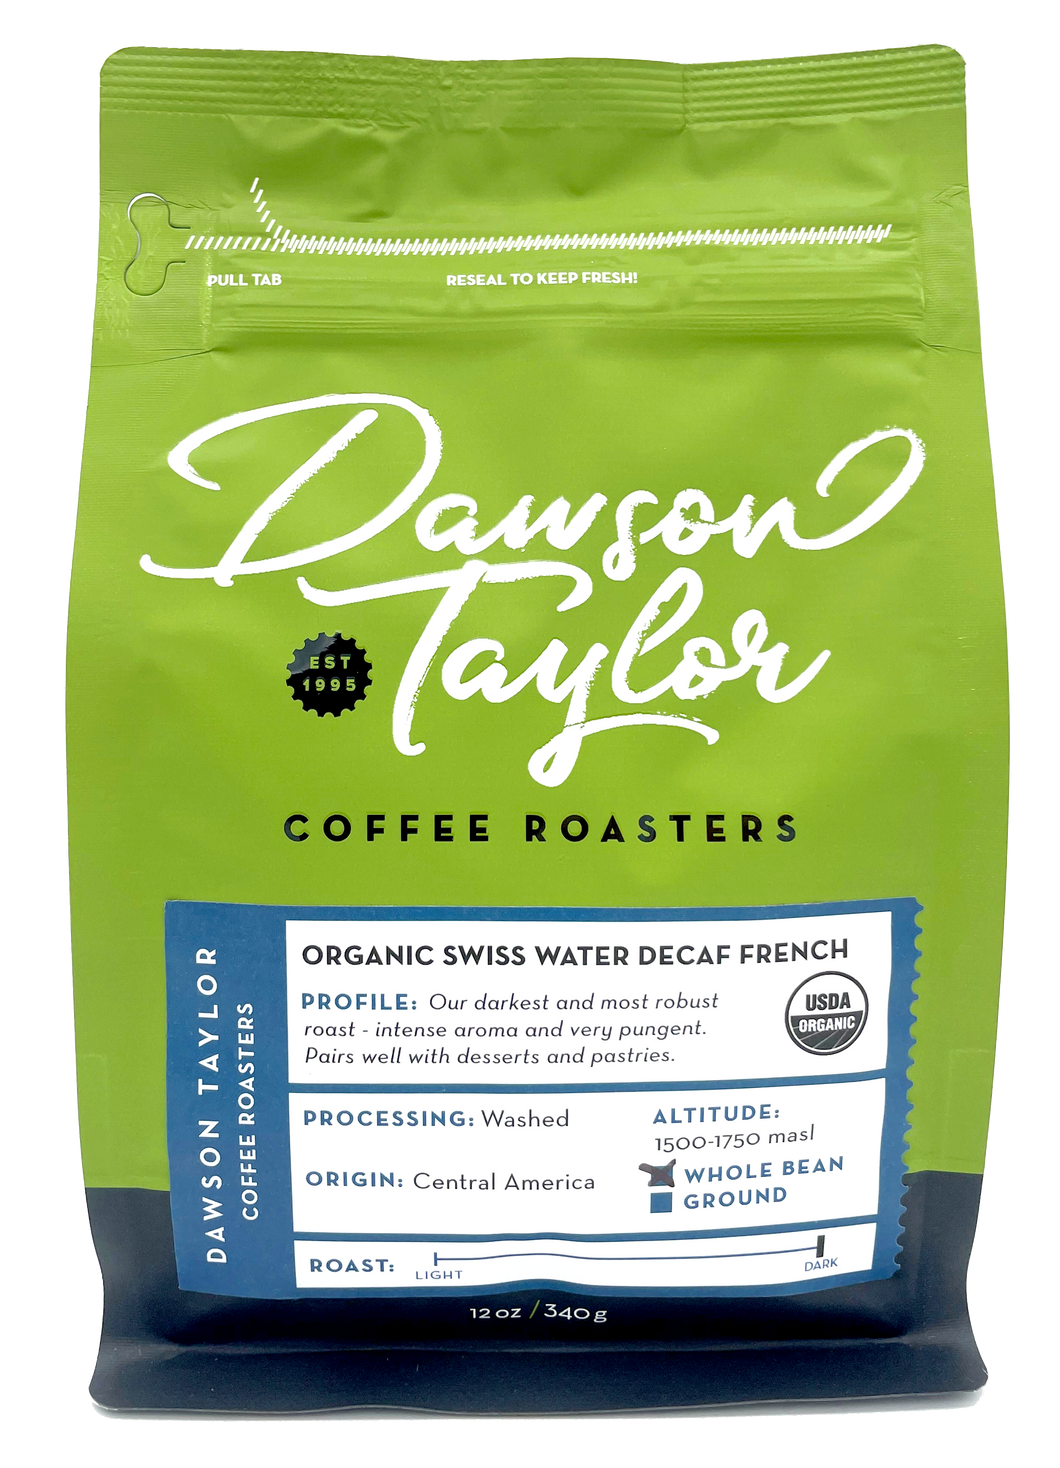 Organic Swiss Water Decaf French